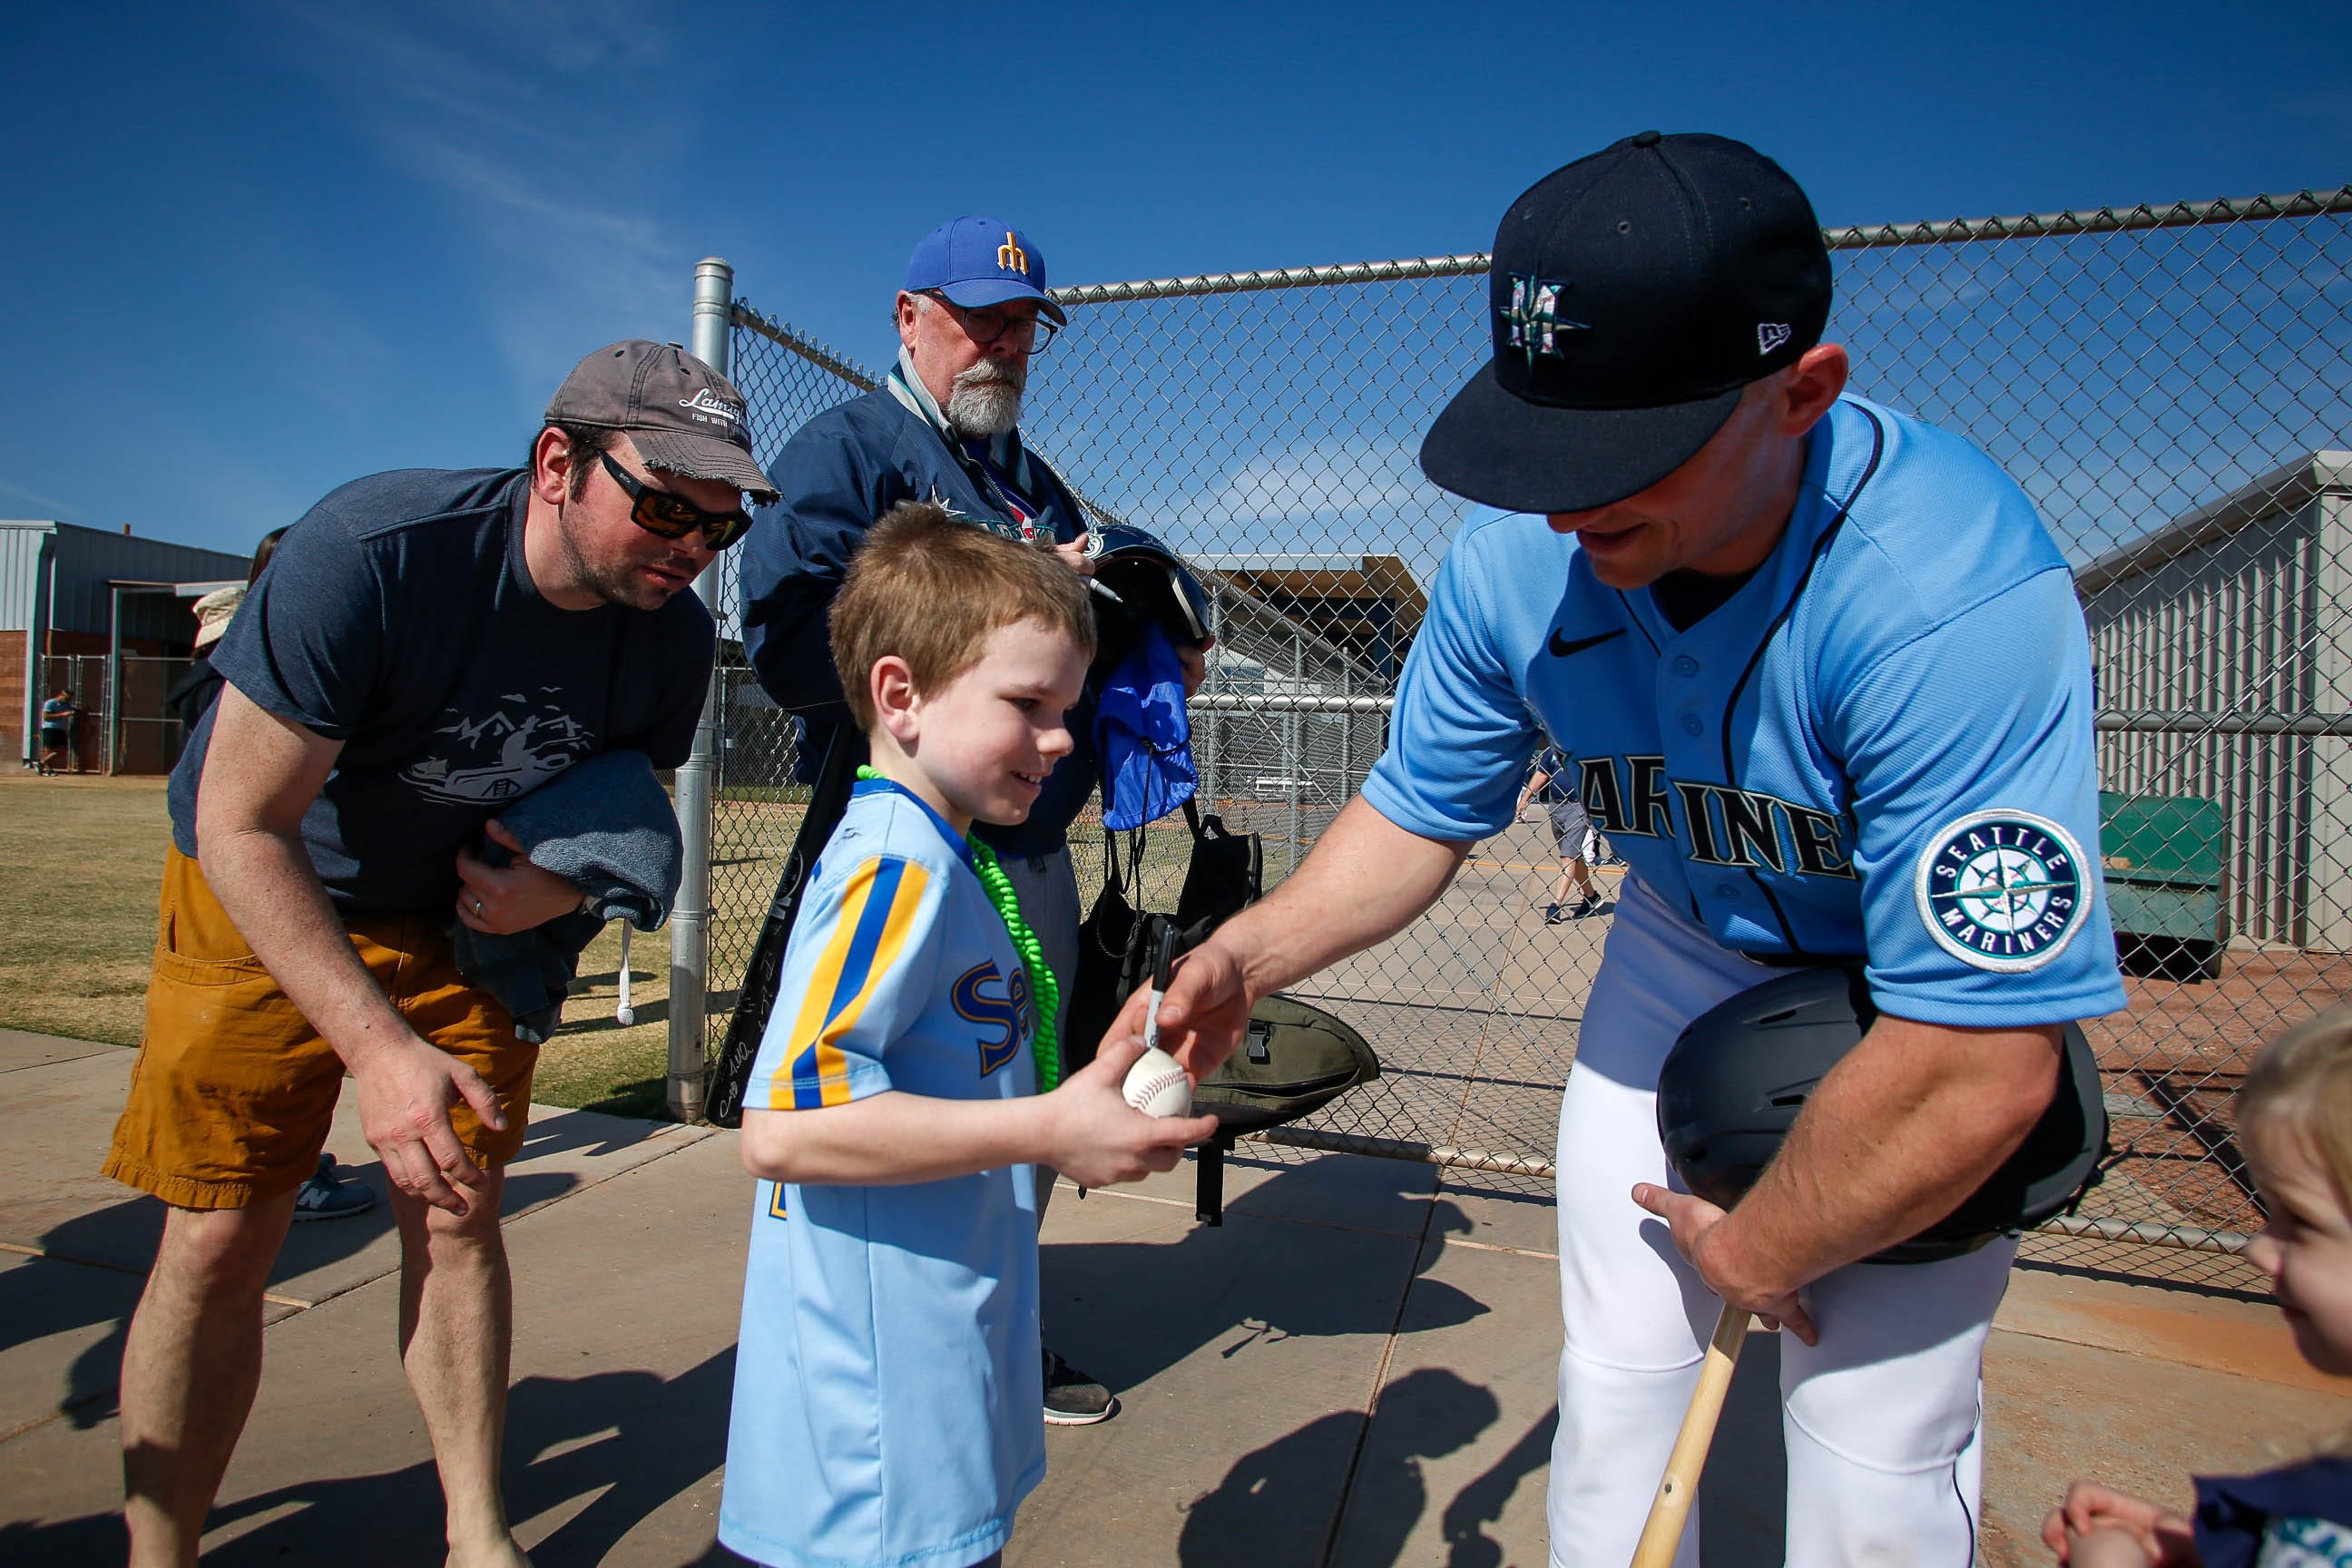 Mariners 2020 Spring Training — Day 7, by Mariners PR